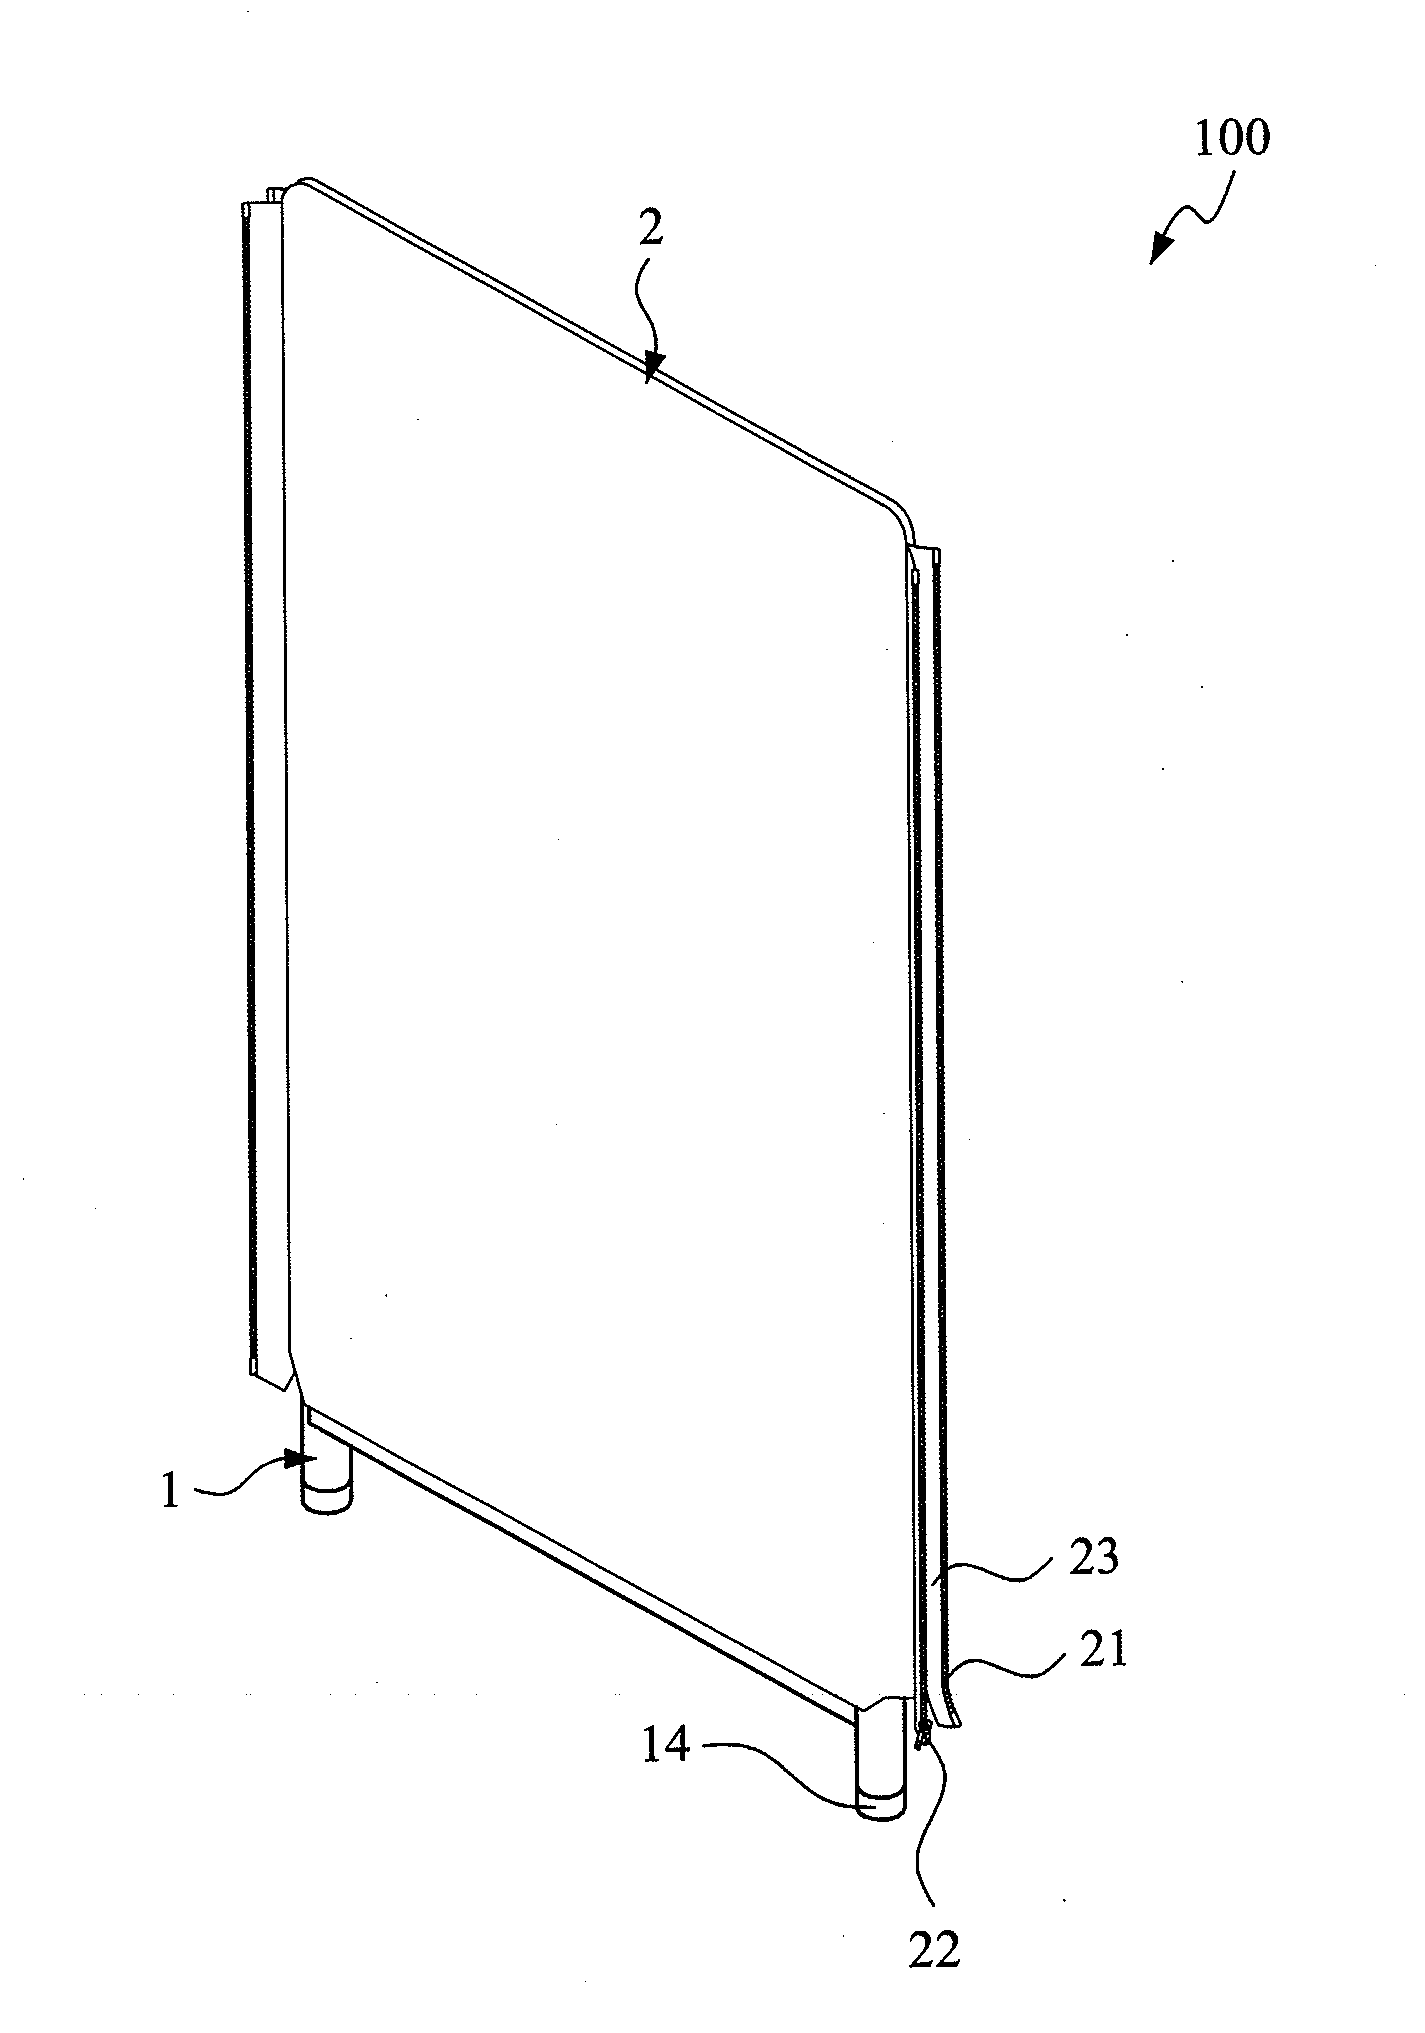 Convenient and portable space partitioning device